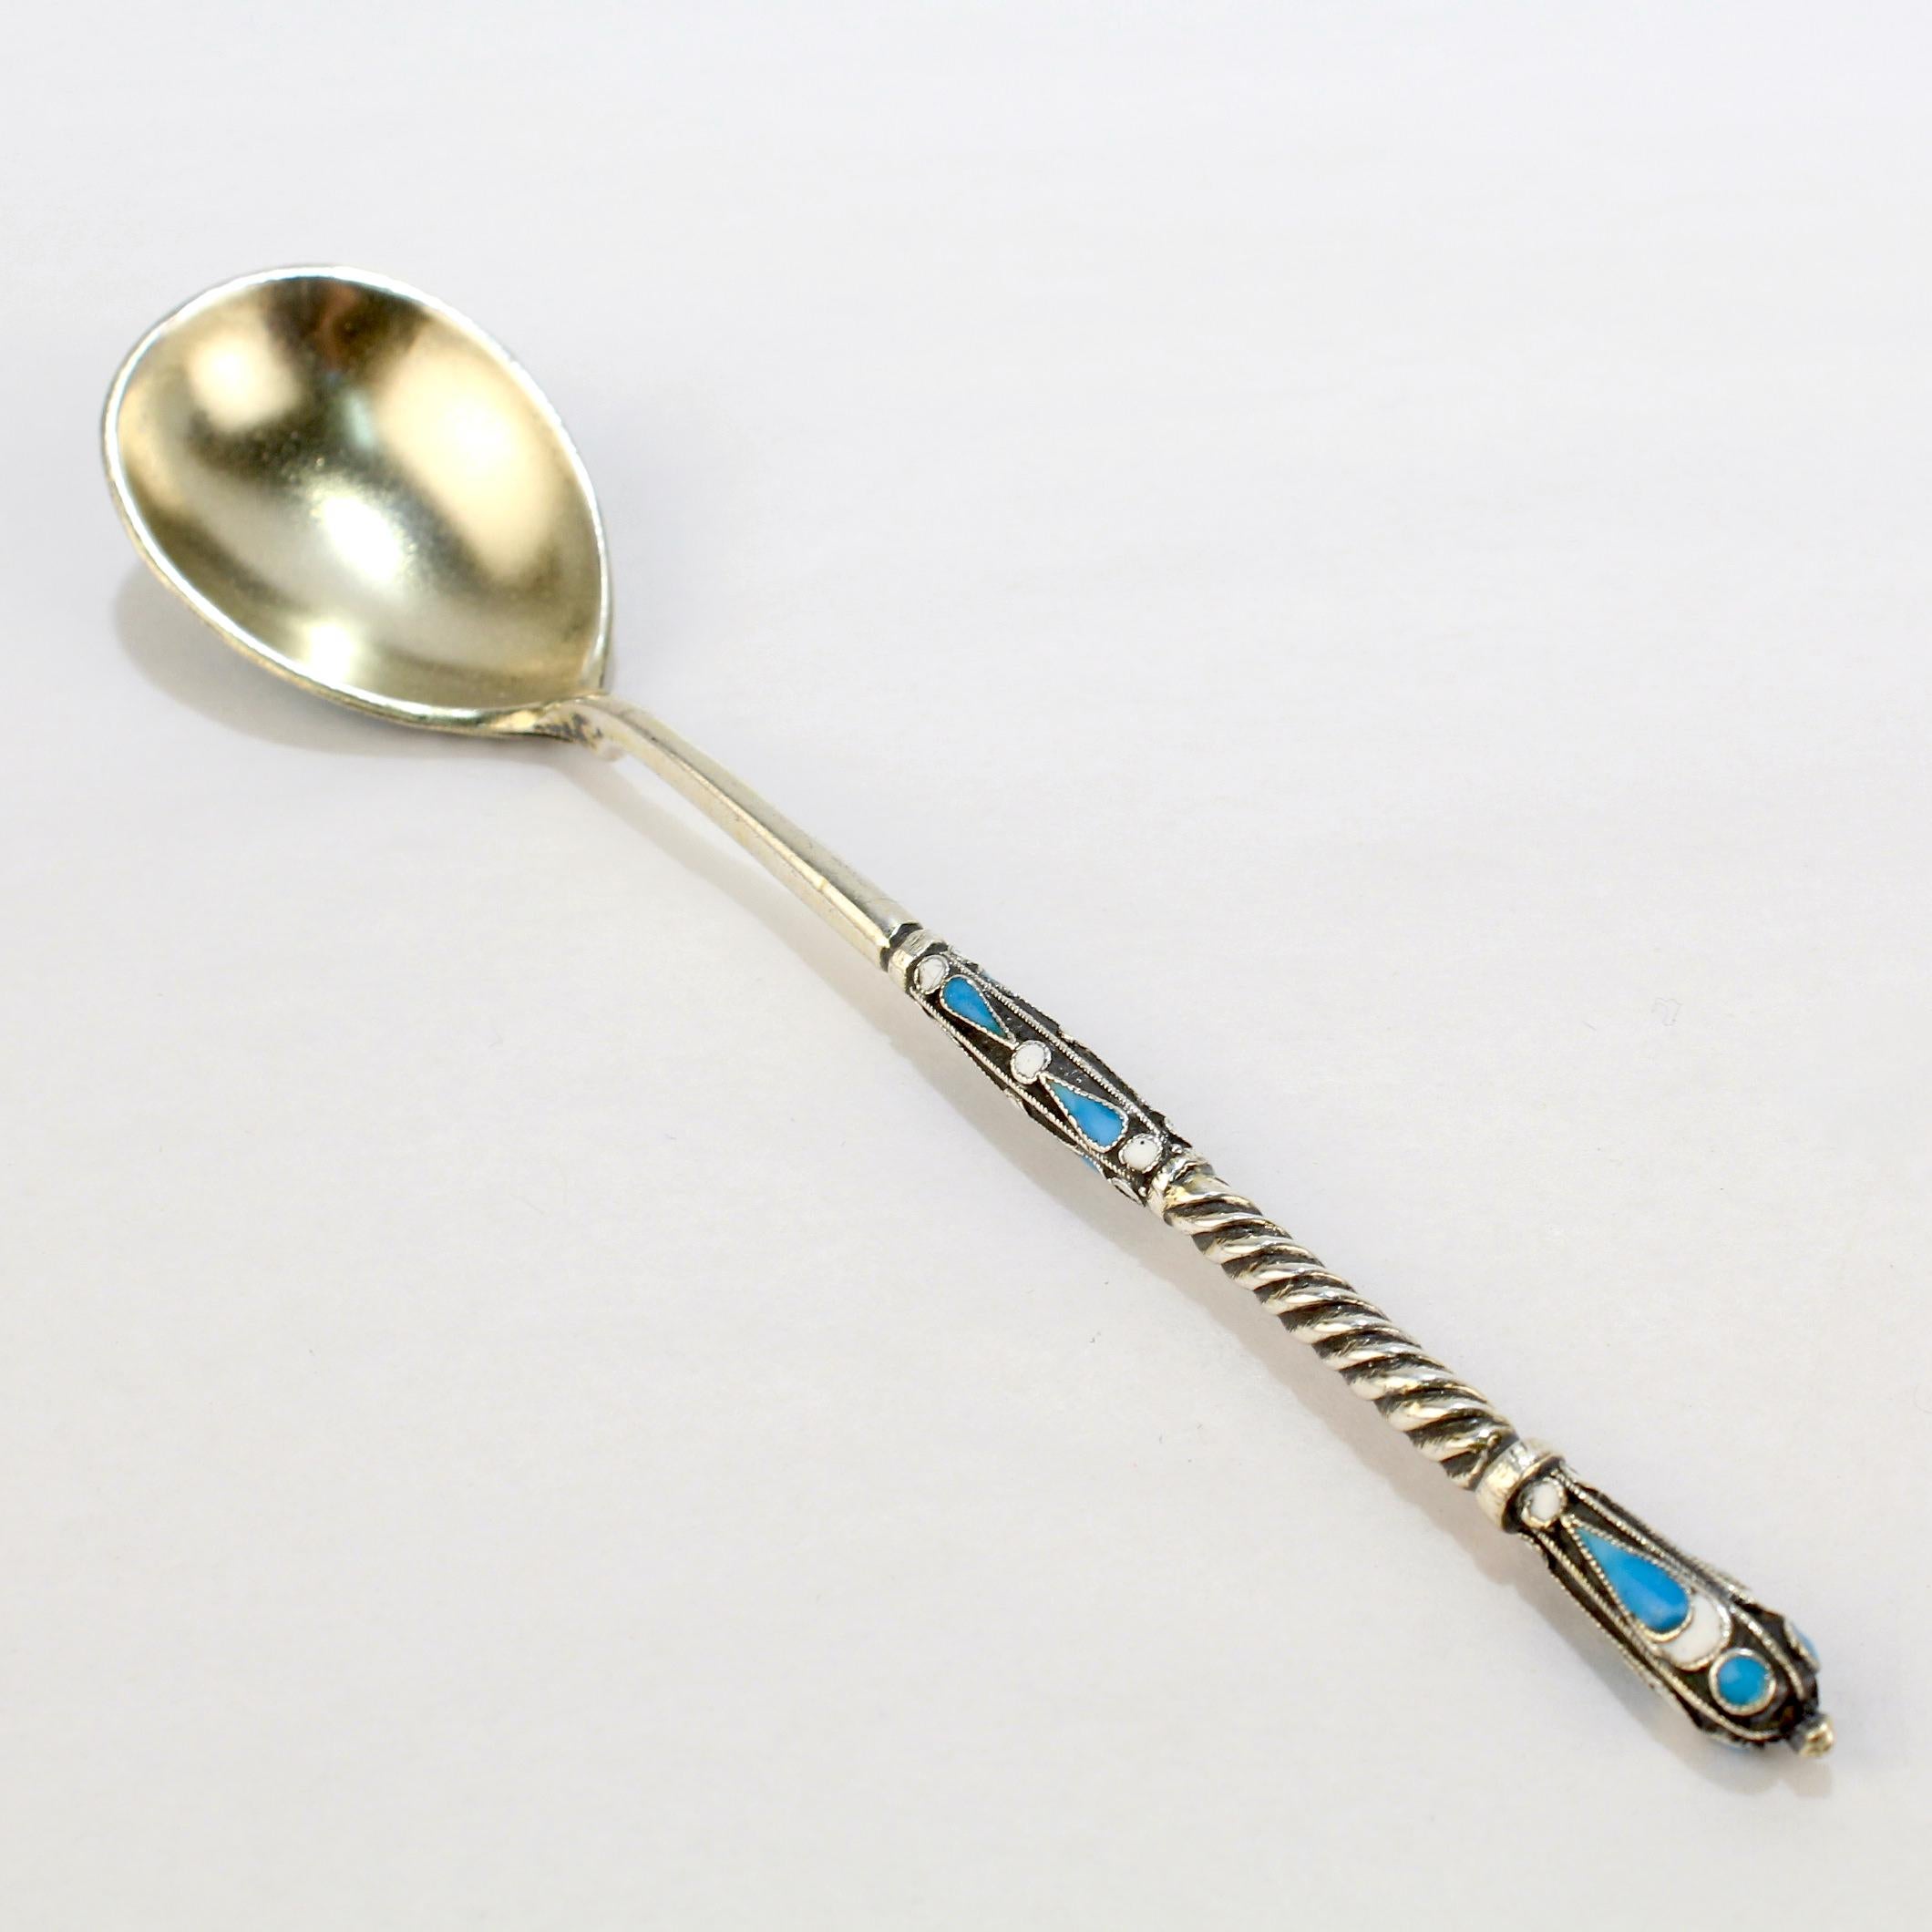 22k gold spoon for baby